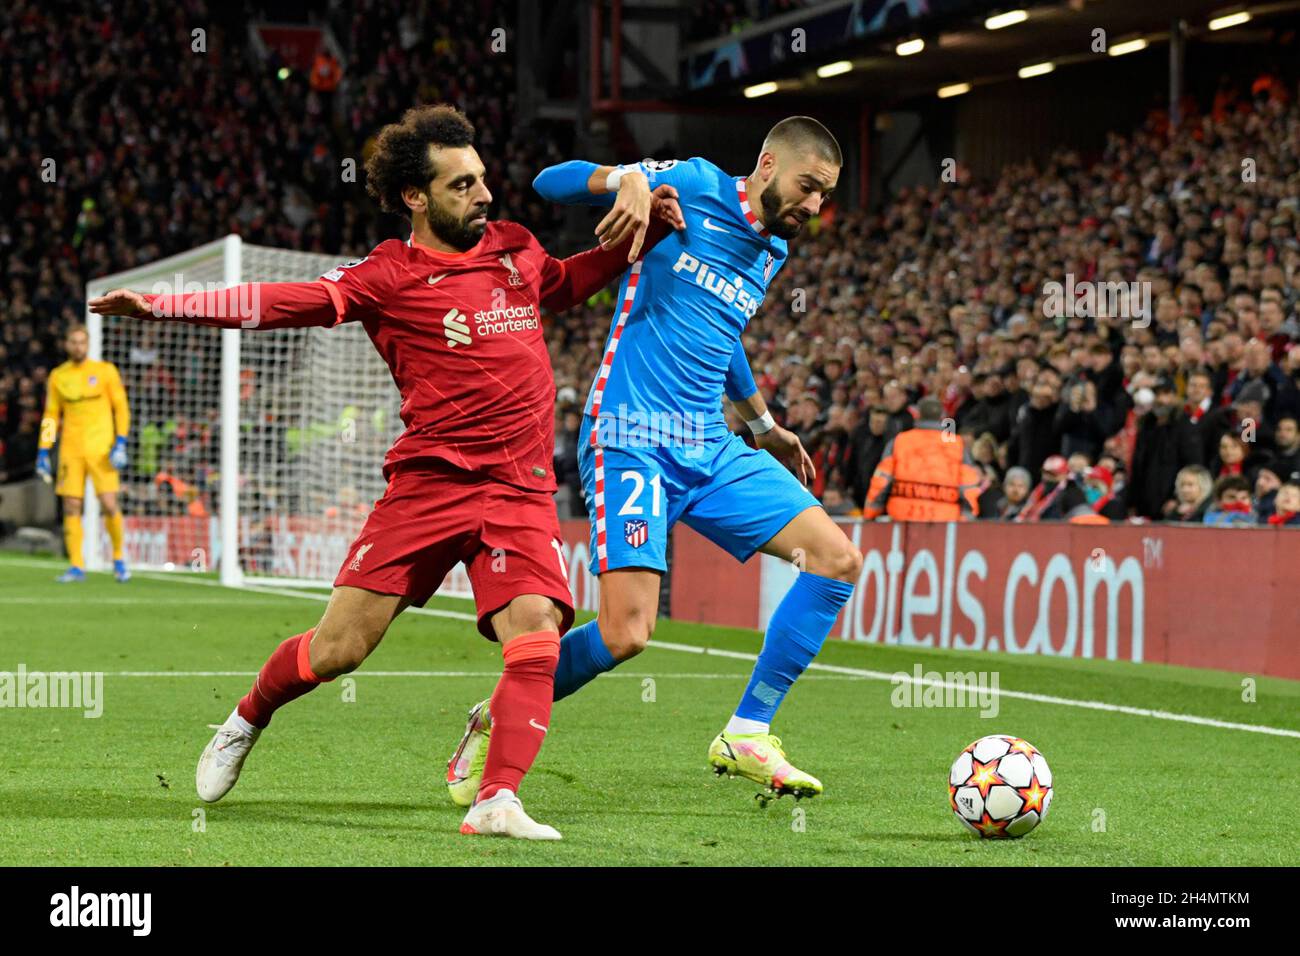 Mohamed Salah #11 of Liverpool challenges Yannick Carrasco #21 of Atletico Madrid for the ball Stock Photo